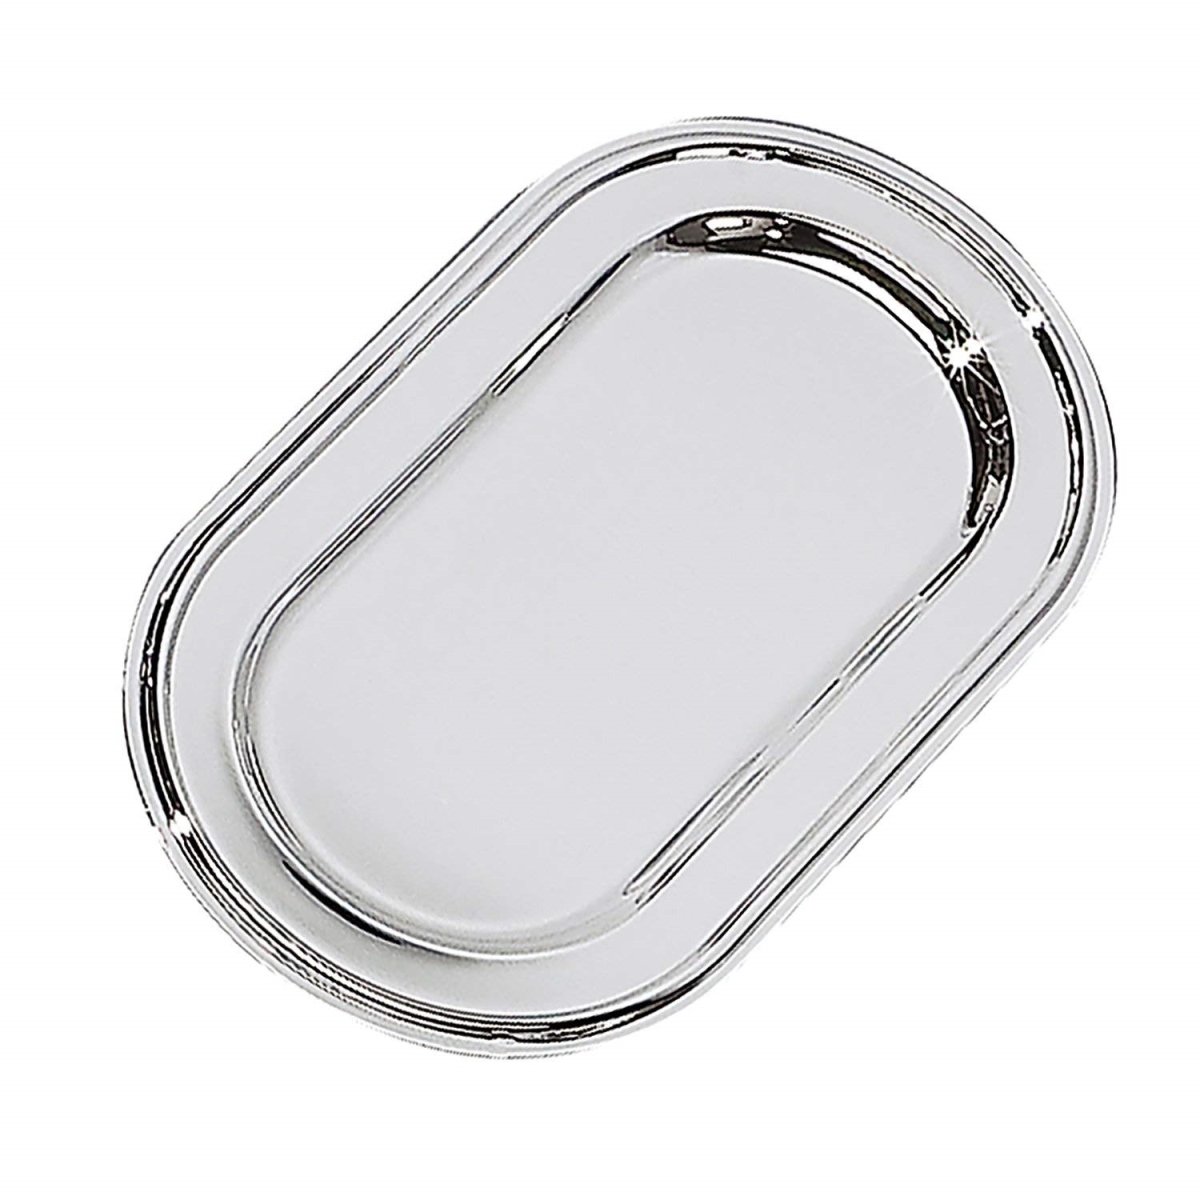 82221 11 X 6 In. Silver Oval Tray